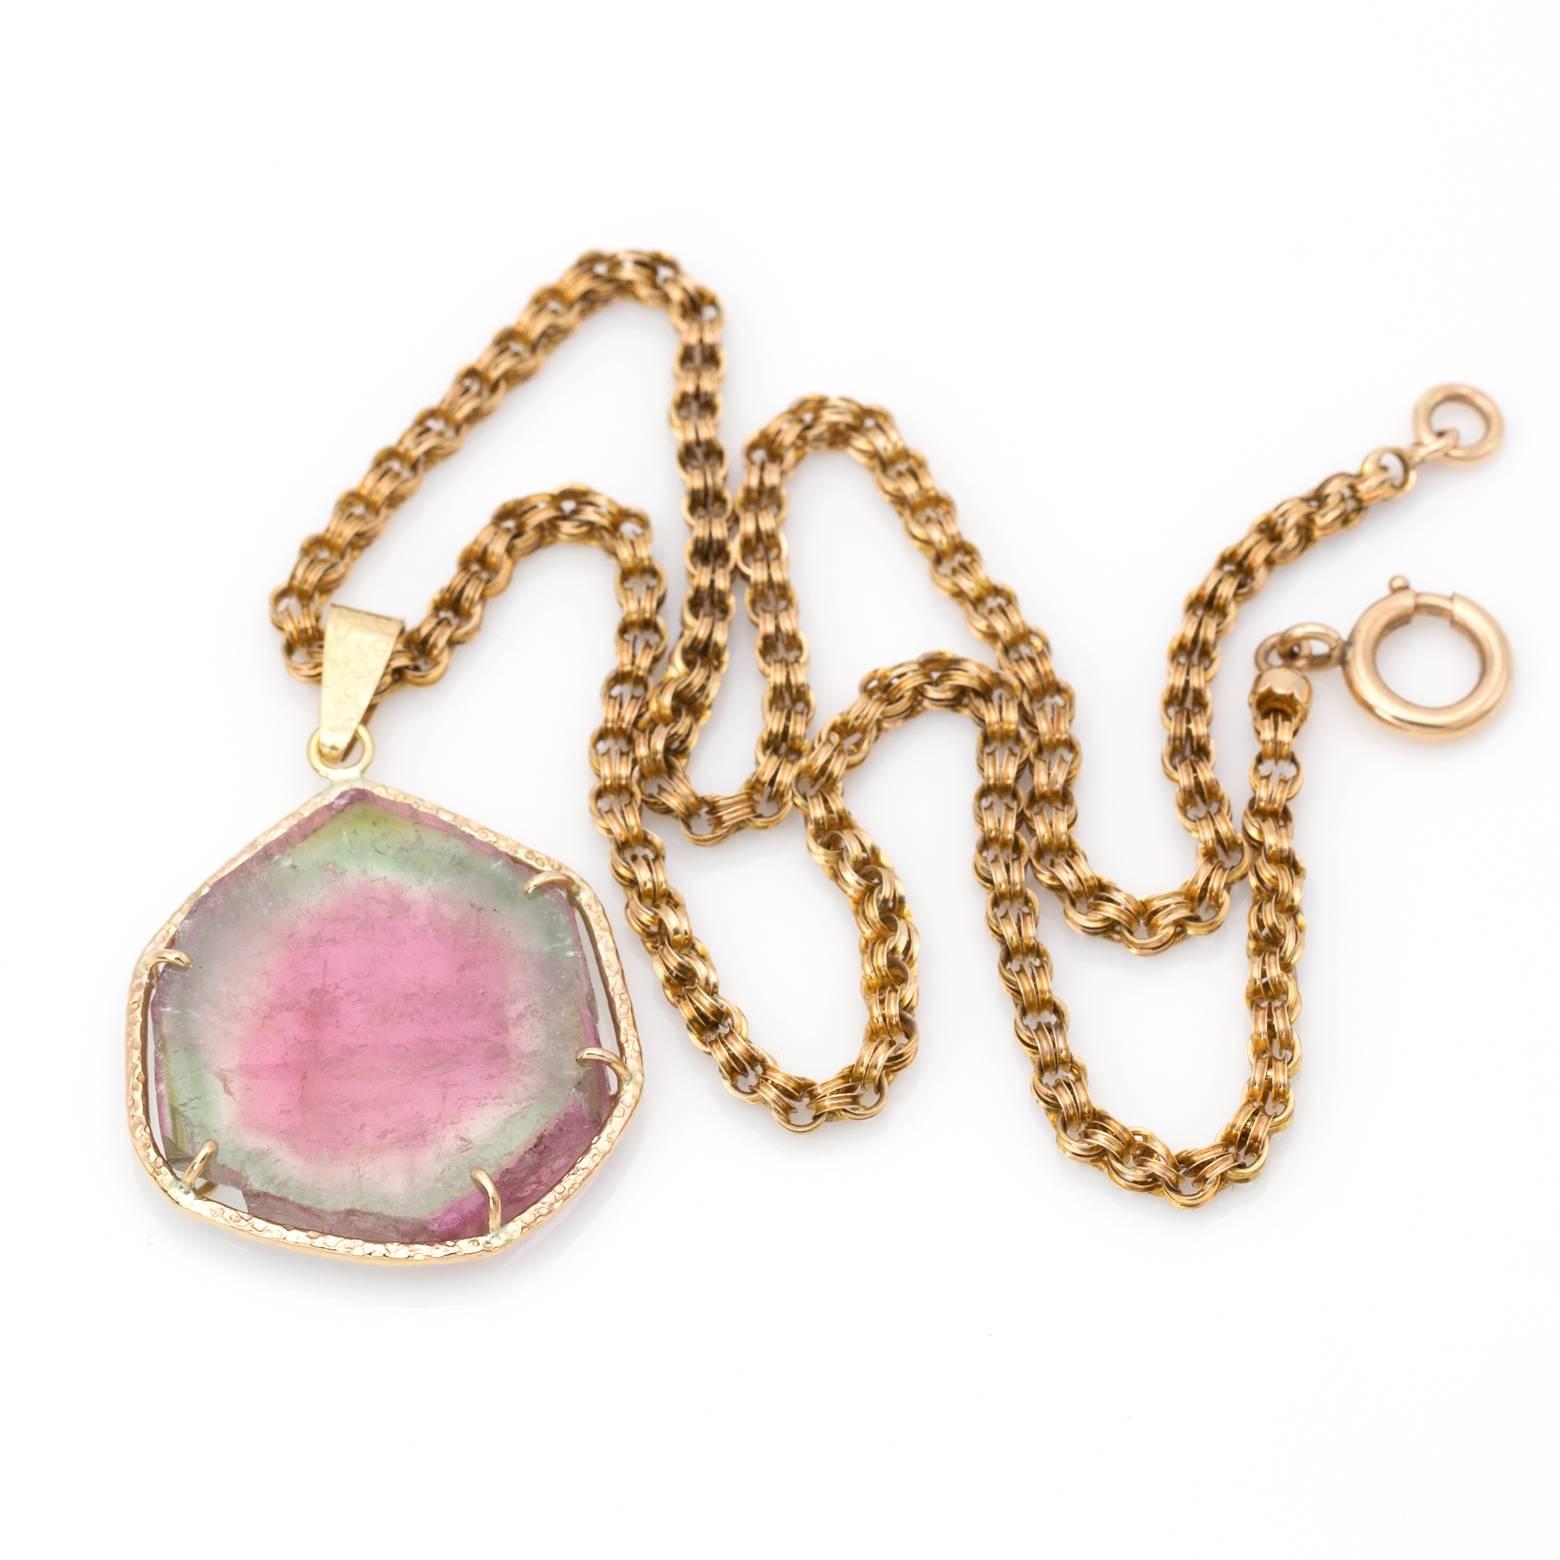 Pink and green watermelon tourmaline set in 14K yellow gold and embellished with hammered detail. This pendant speaks for itself in intricacy, detail and the natural beauty of nature to create such a magnificent piece. Handmade in the San Francisco